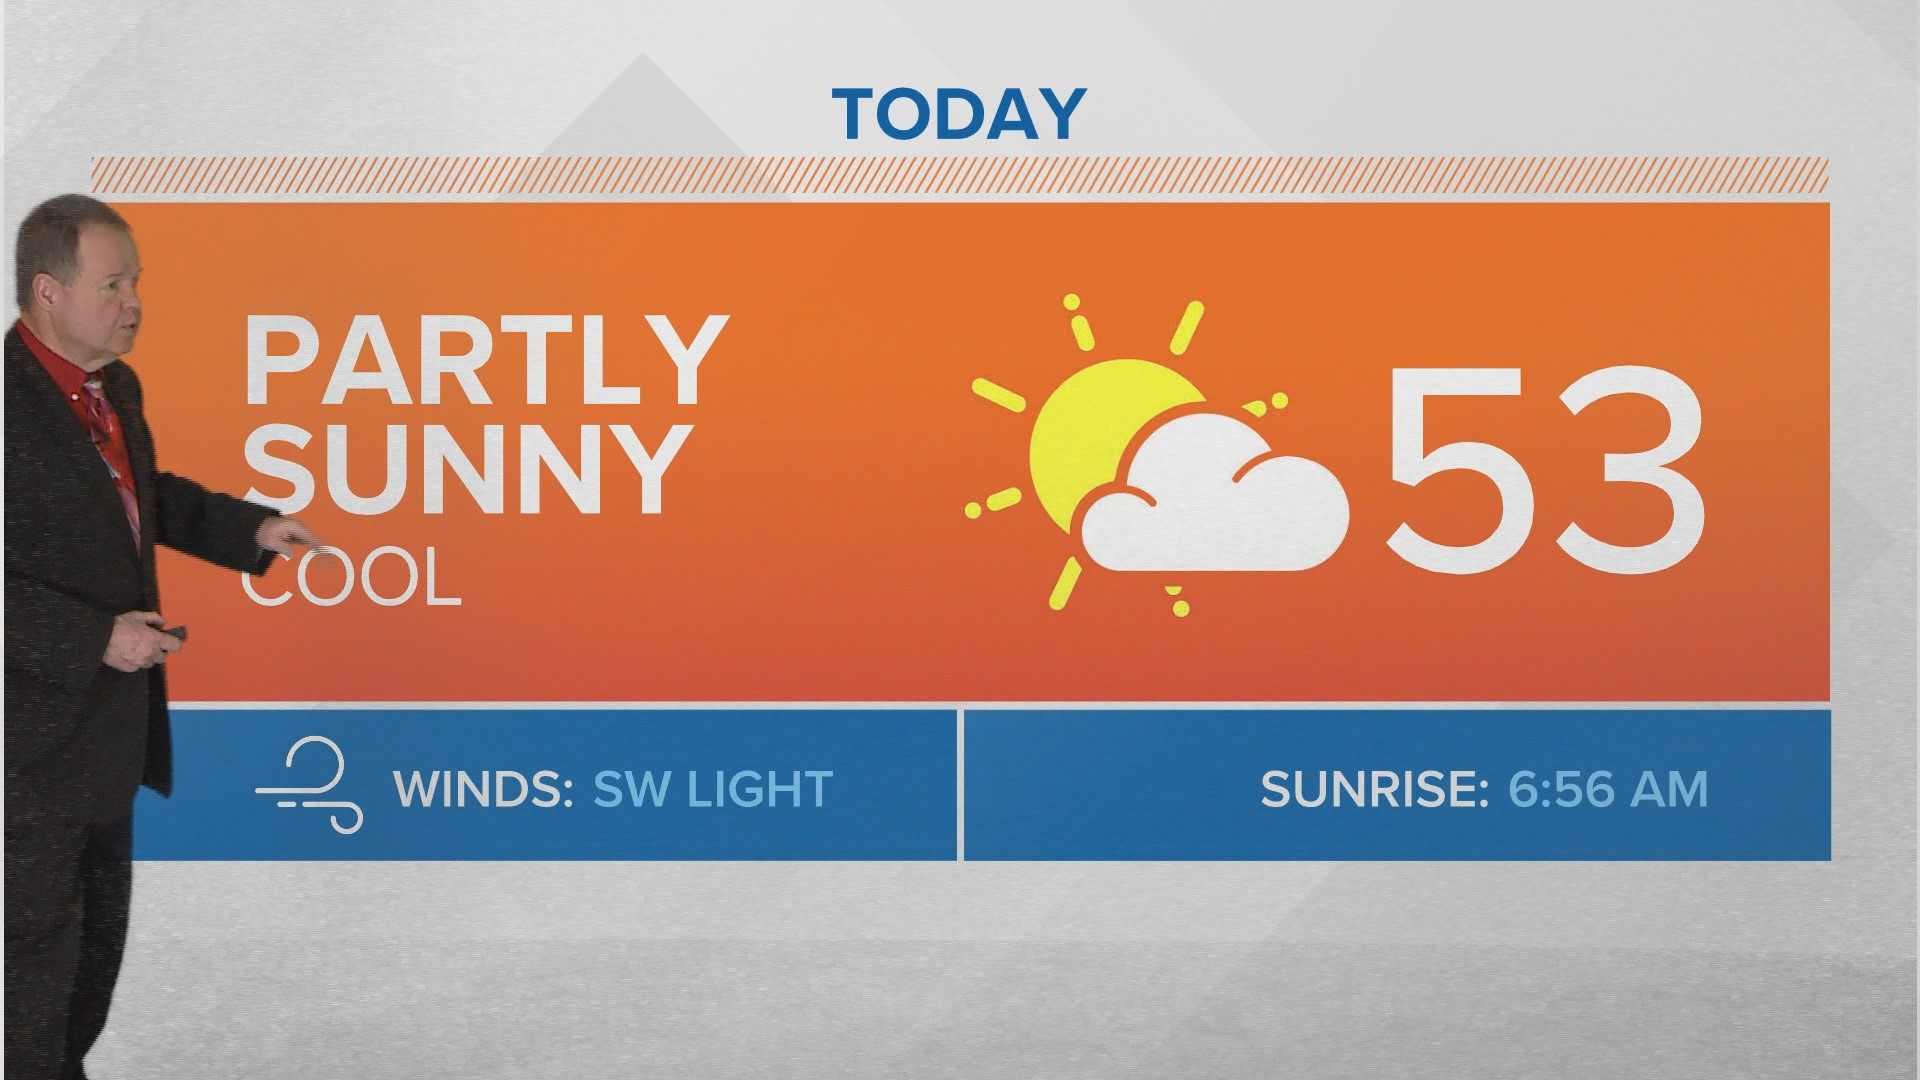 Weather: Mostly cloudy, high 67